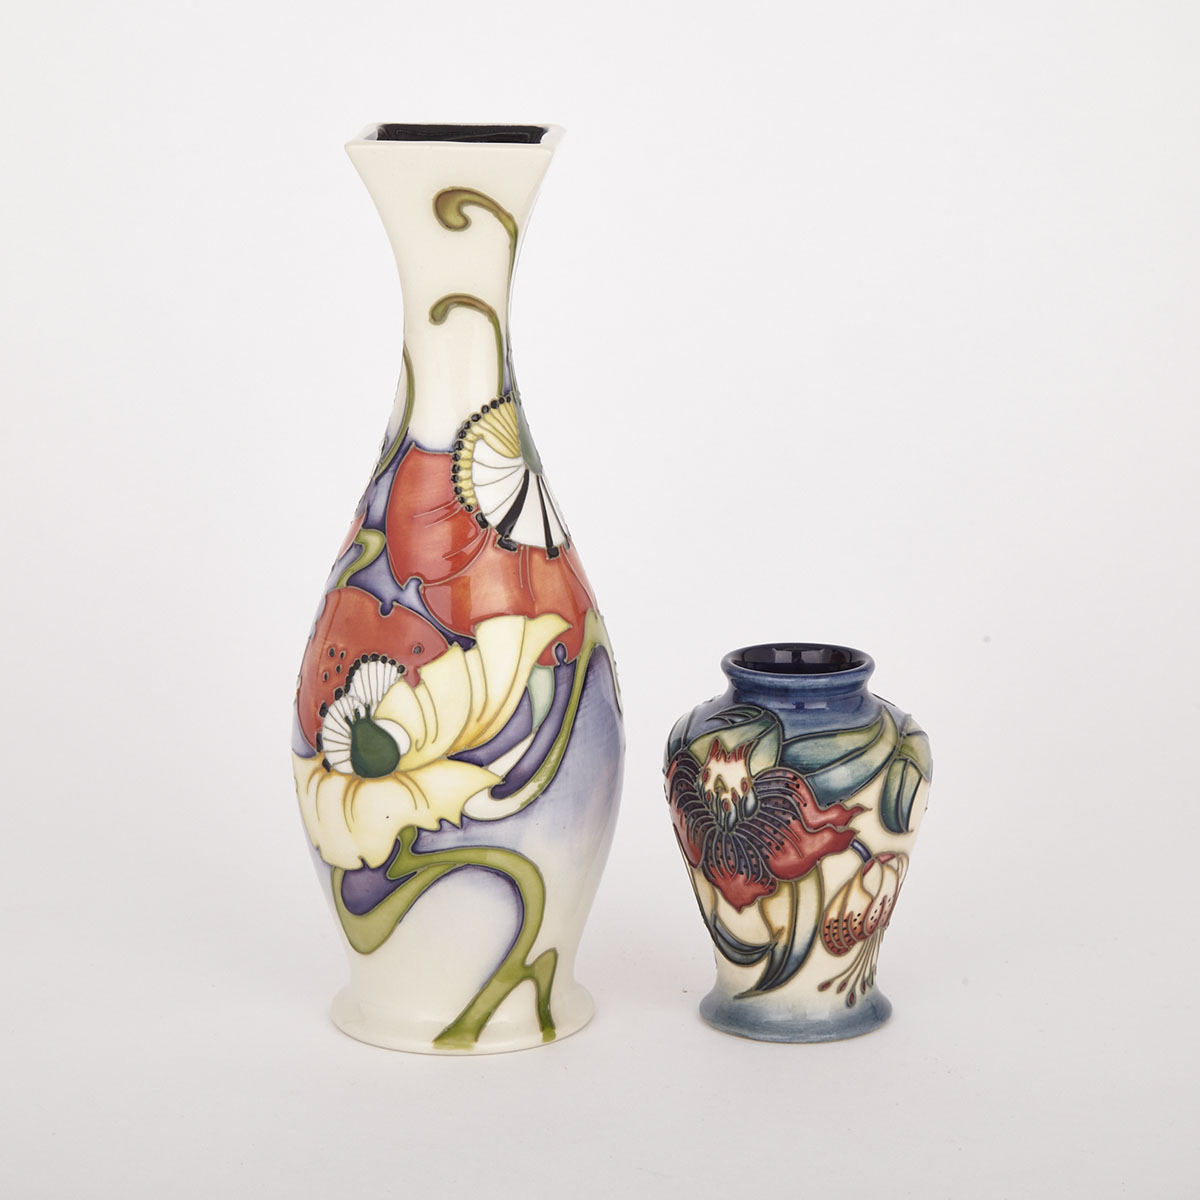 Moorcroft ‘Demeter’ and ‘Anna Lily’ Vases, 2008 and 2001